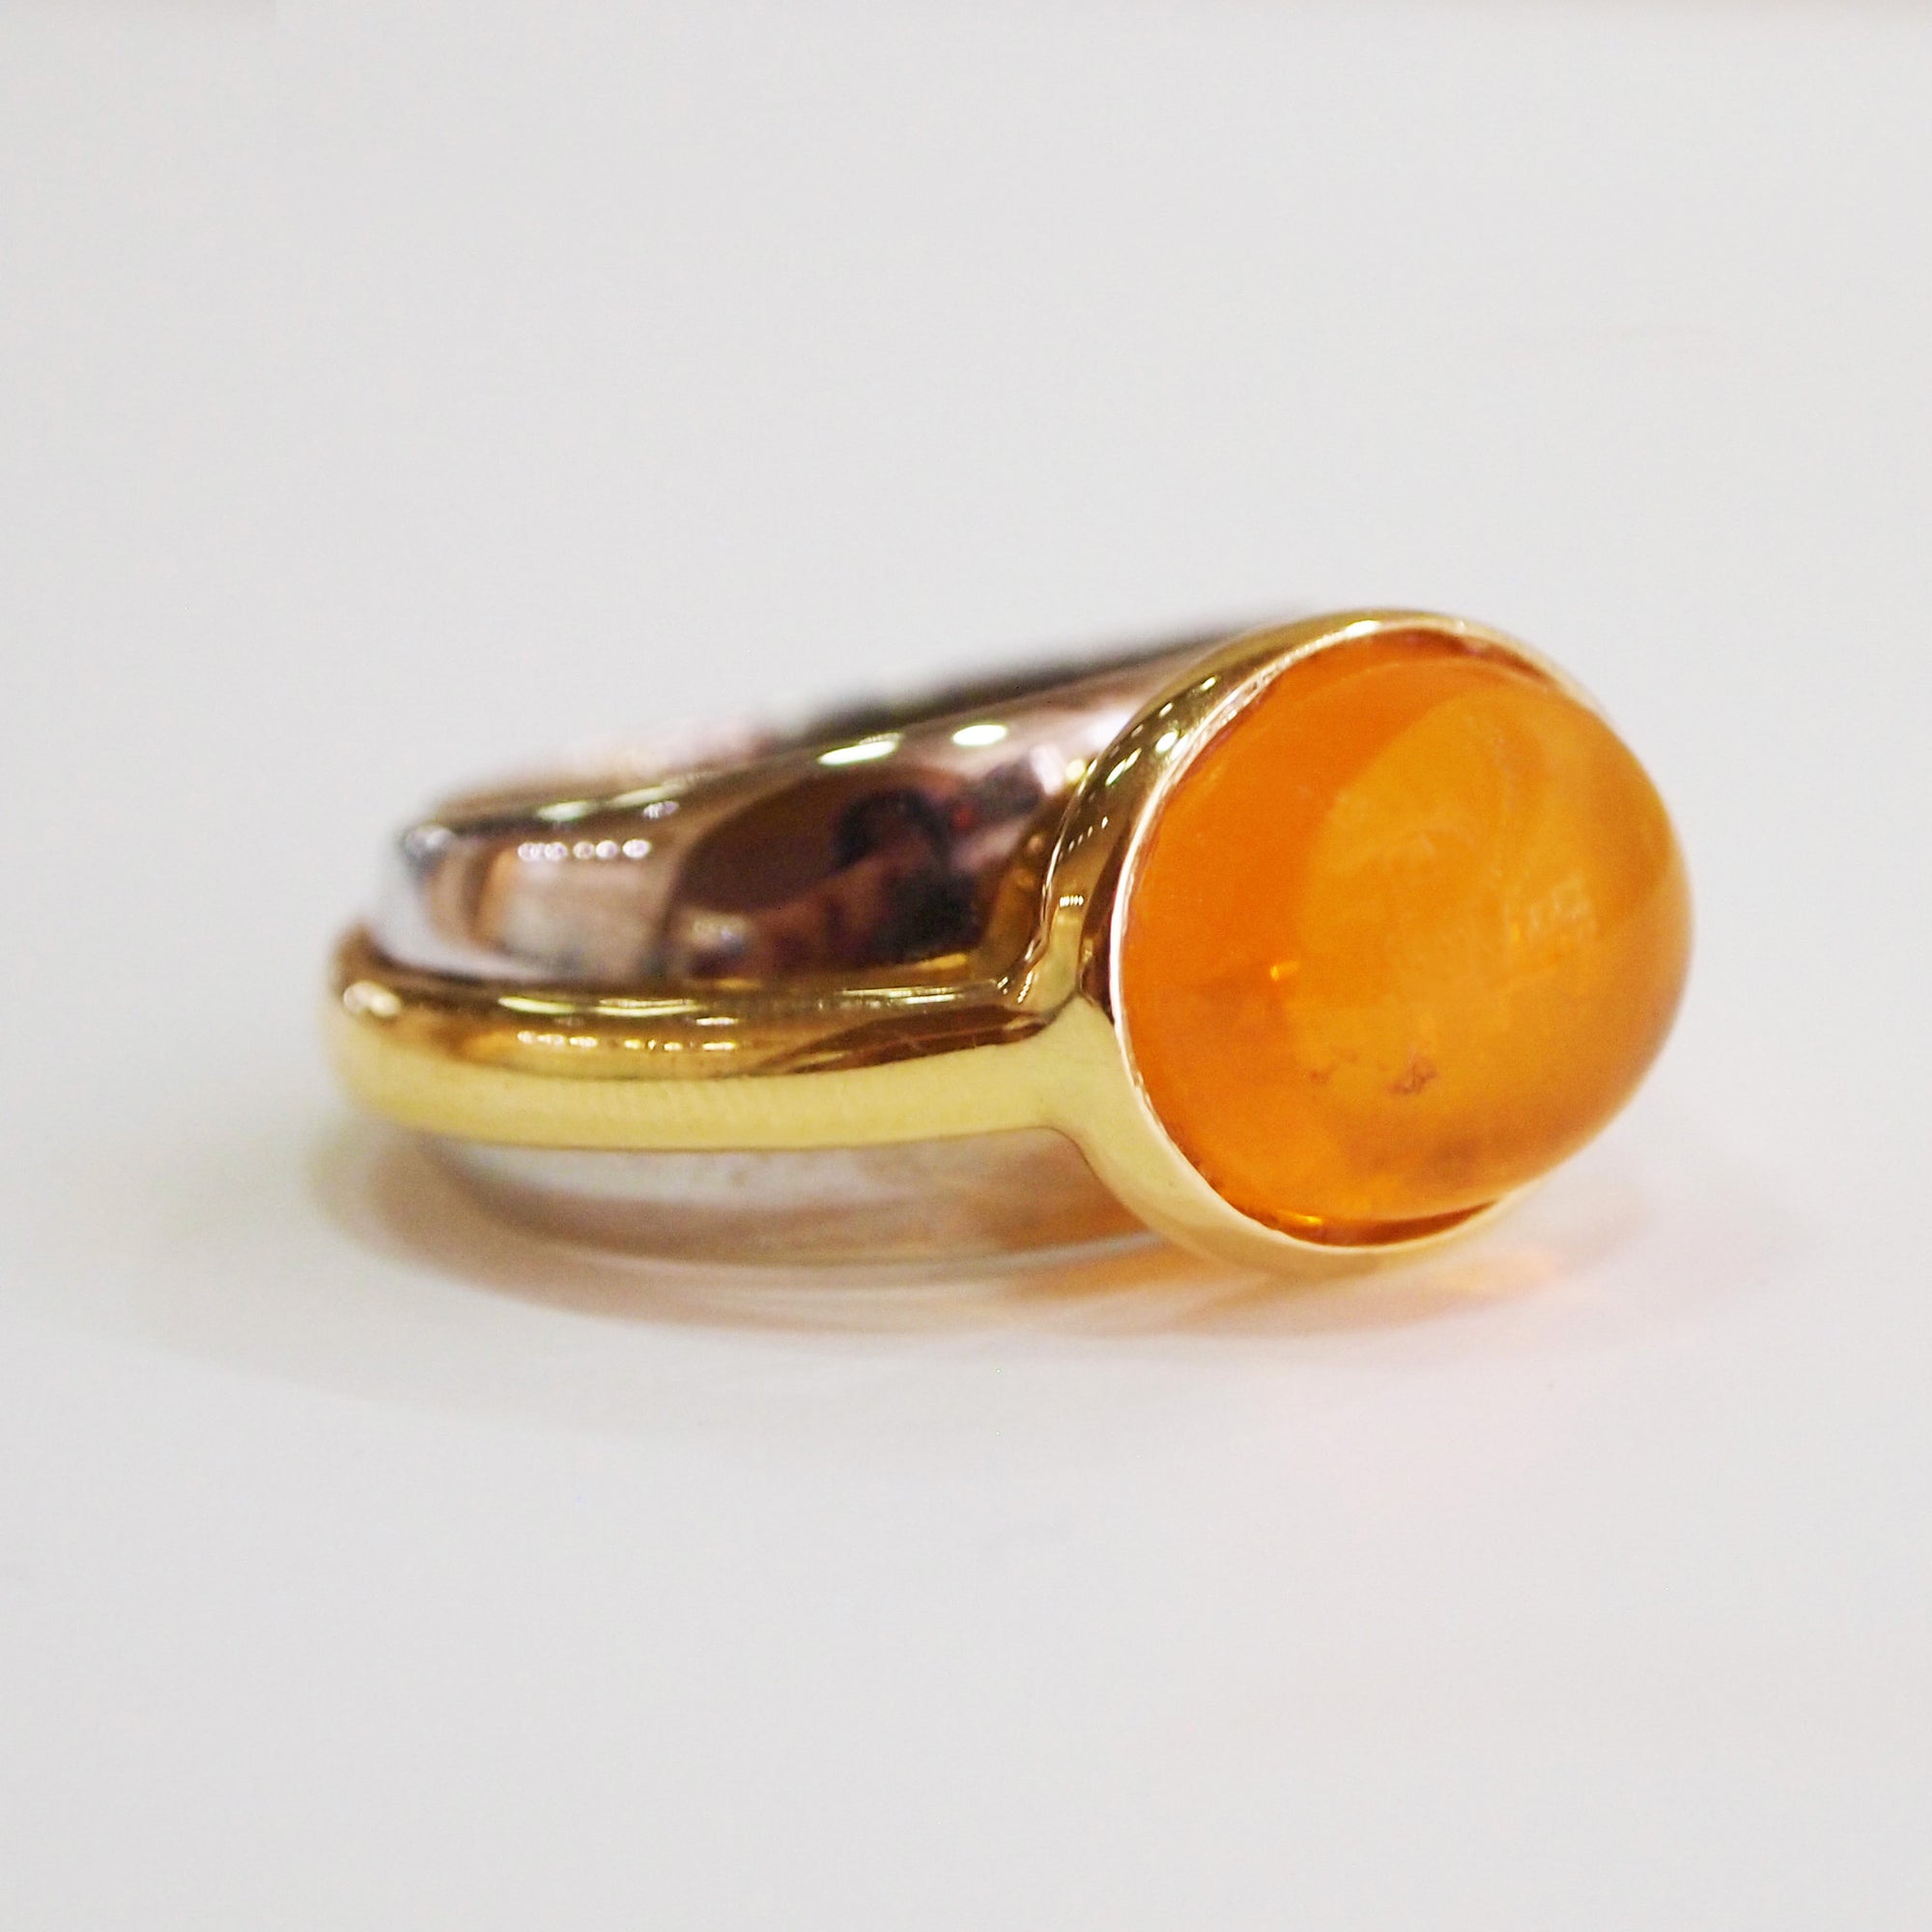 Handmade 18K White And Yellow Gold Mexican Fire Opal Ring